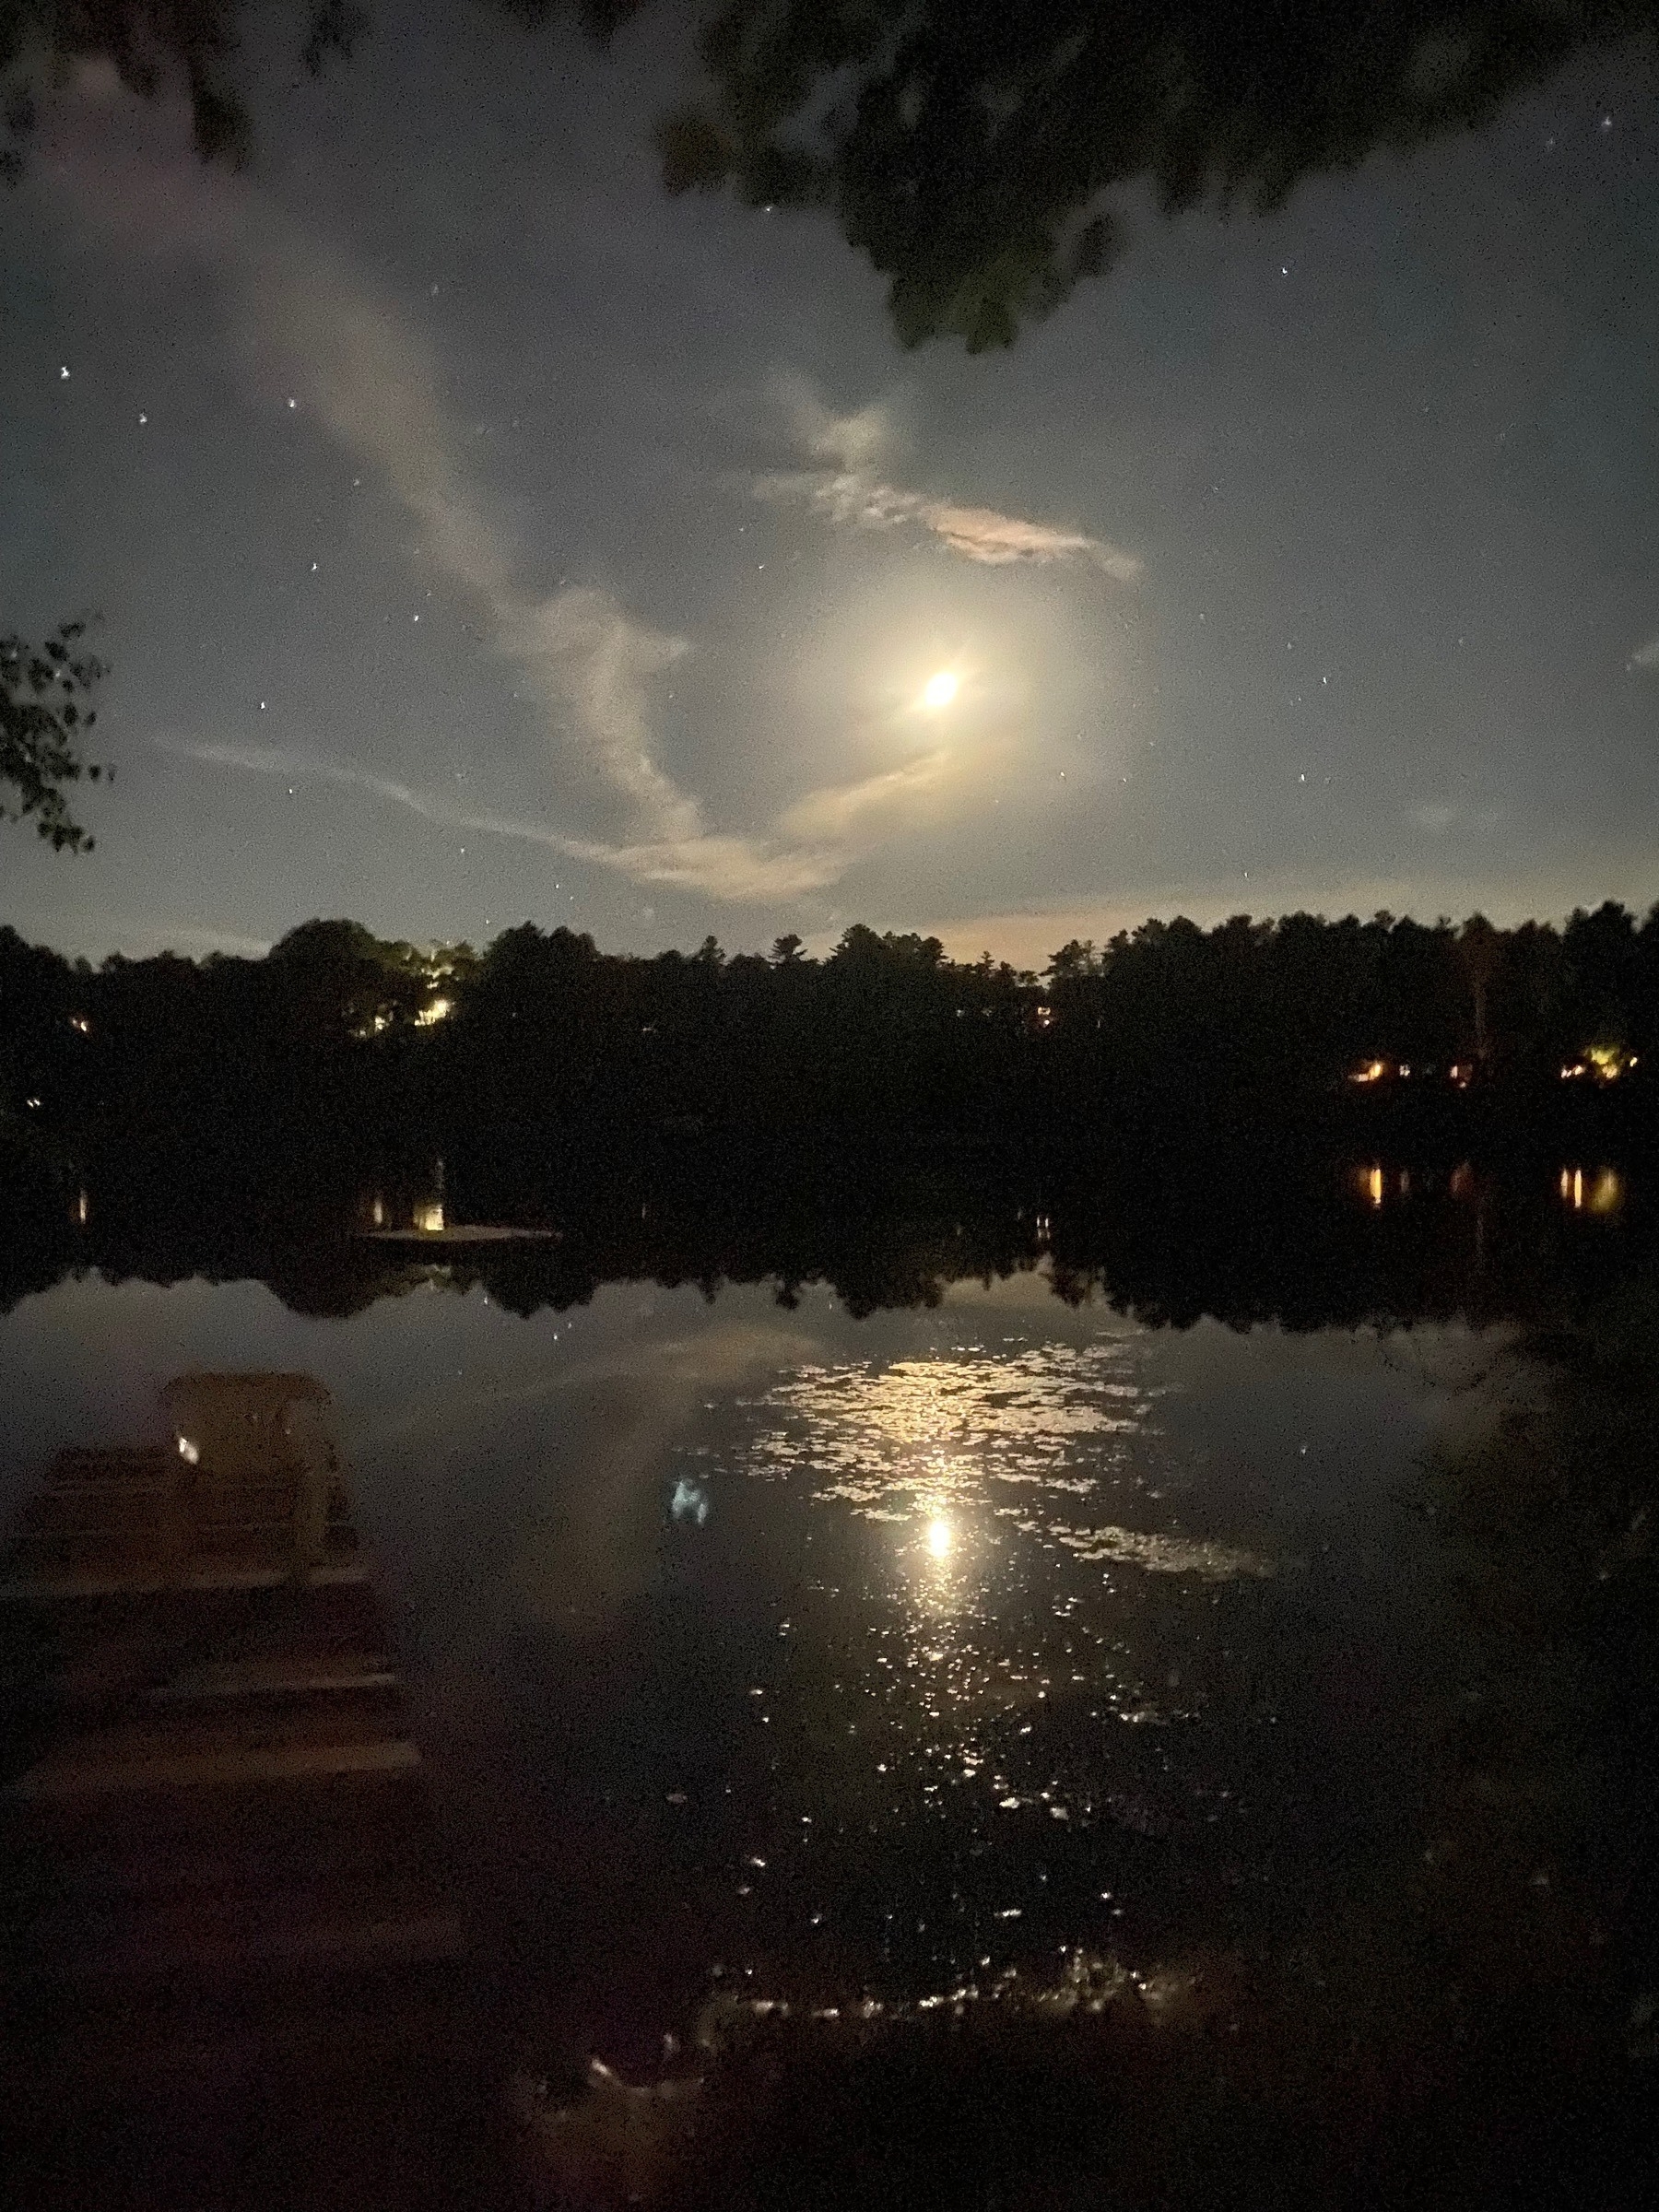 Night view of a pond with the moon and stars above, lights on the far bank, and reflections in the calm waters.